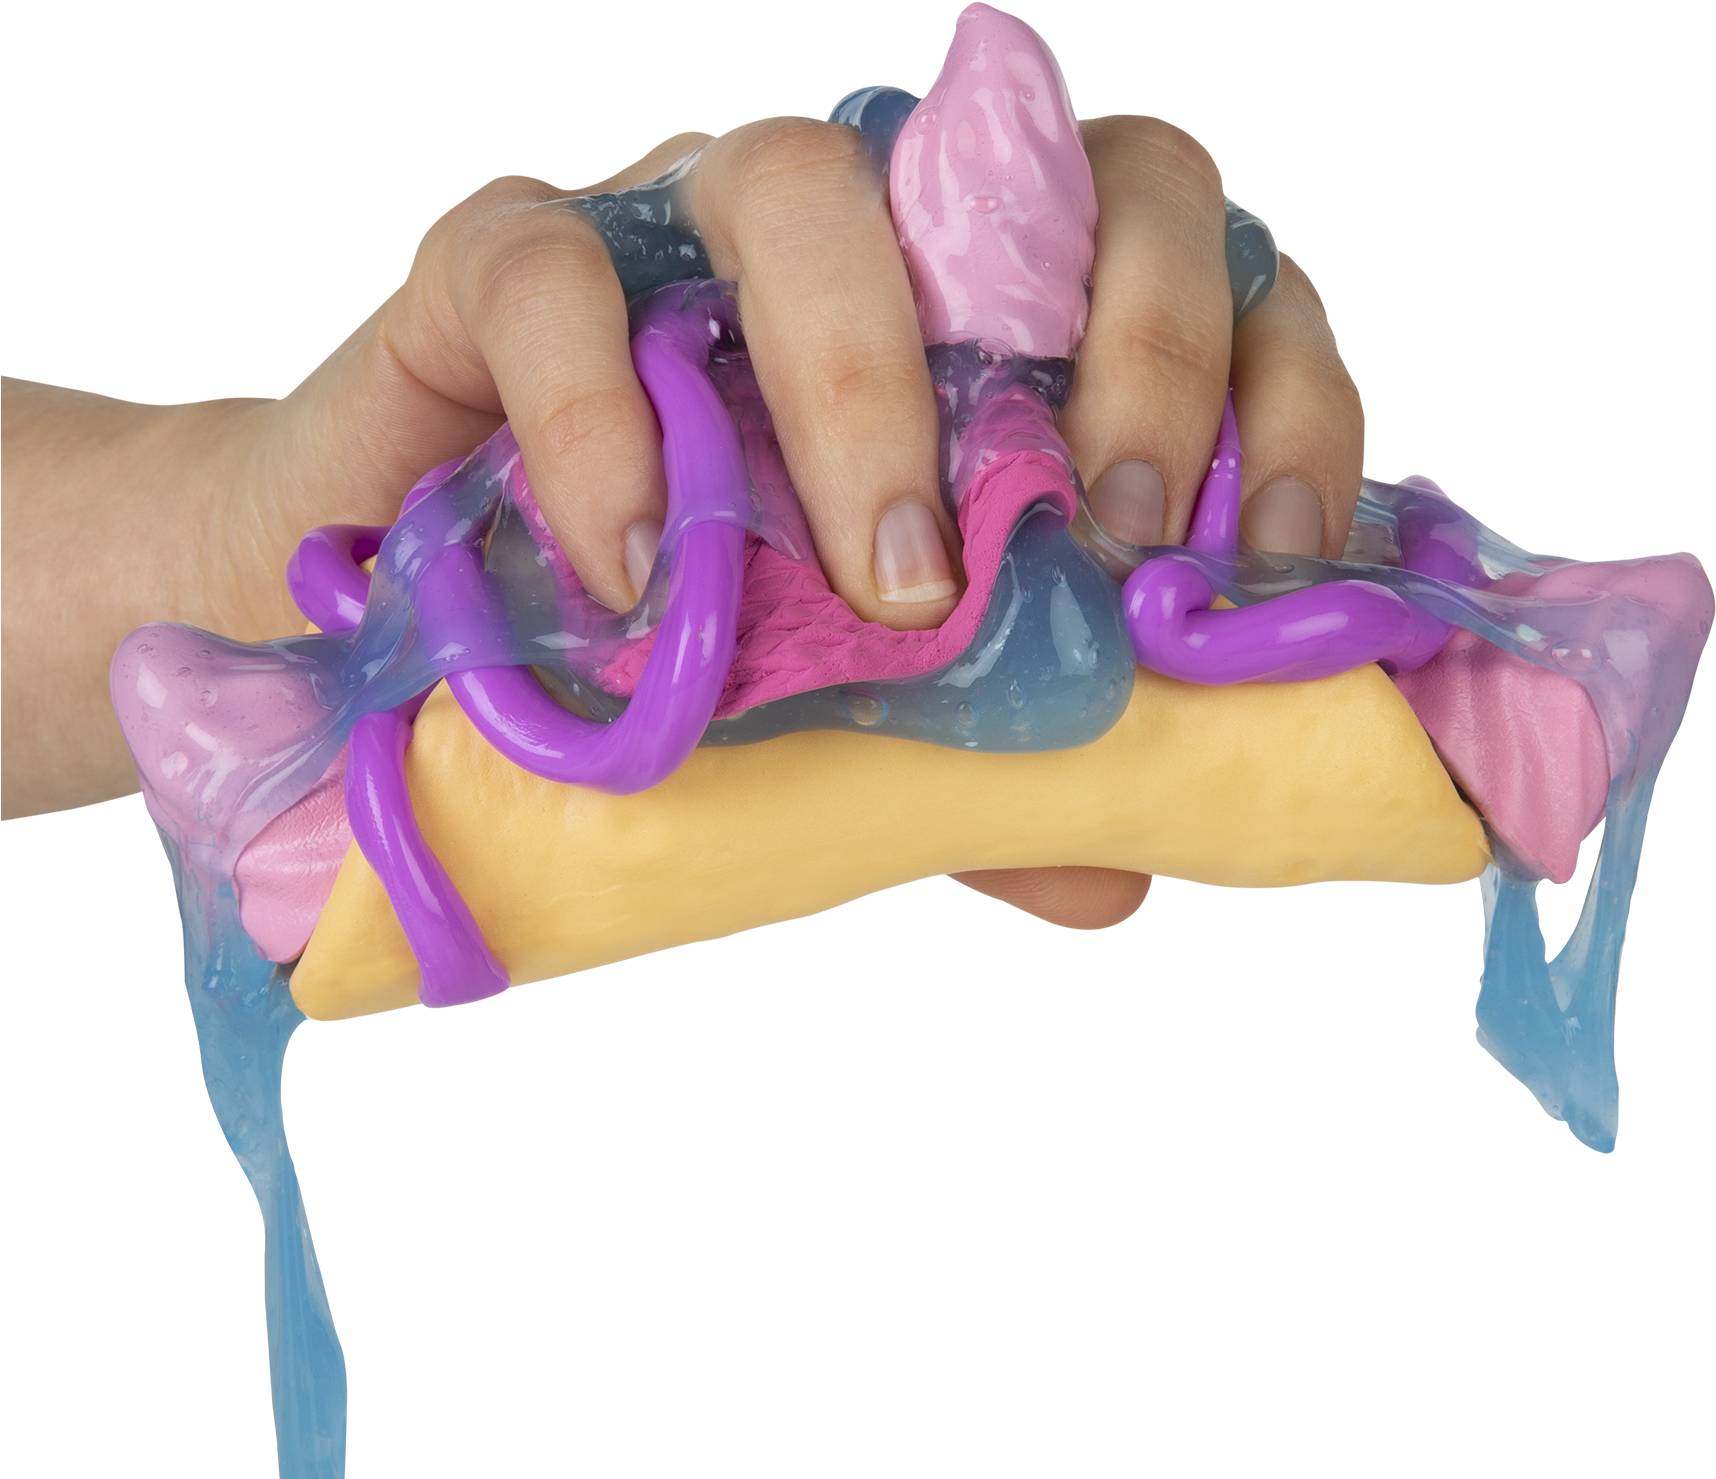 A Hand Holding A Colorful Slime